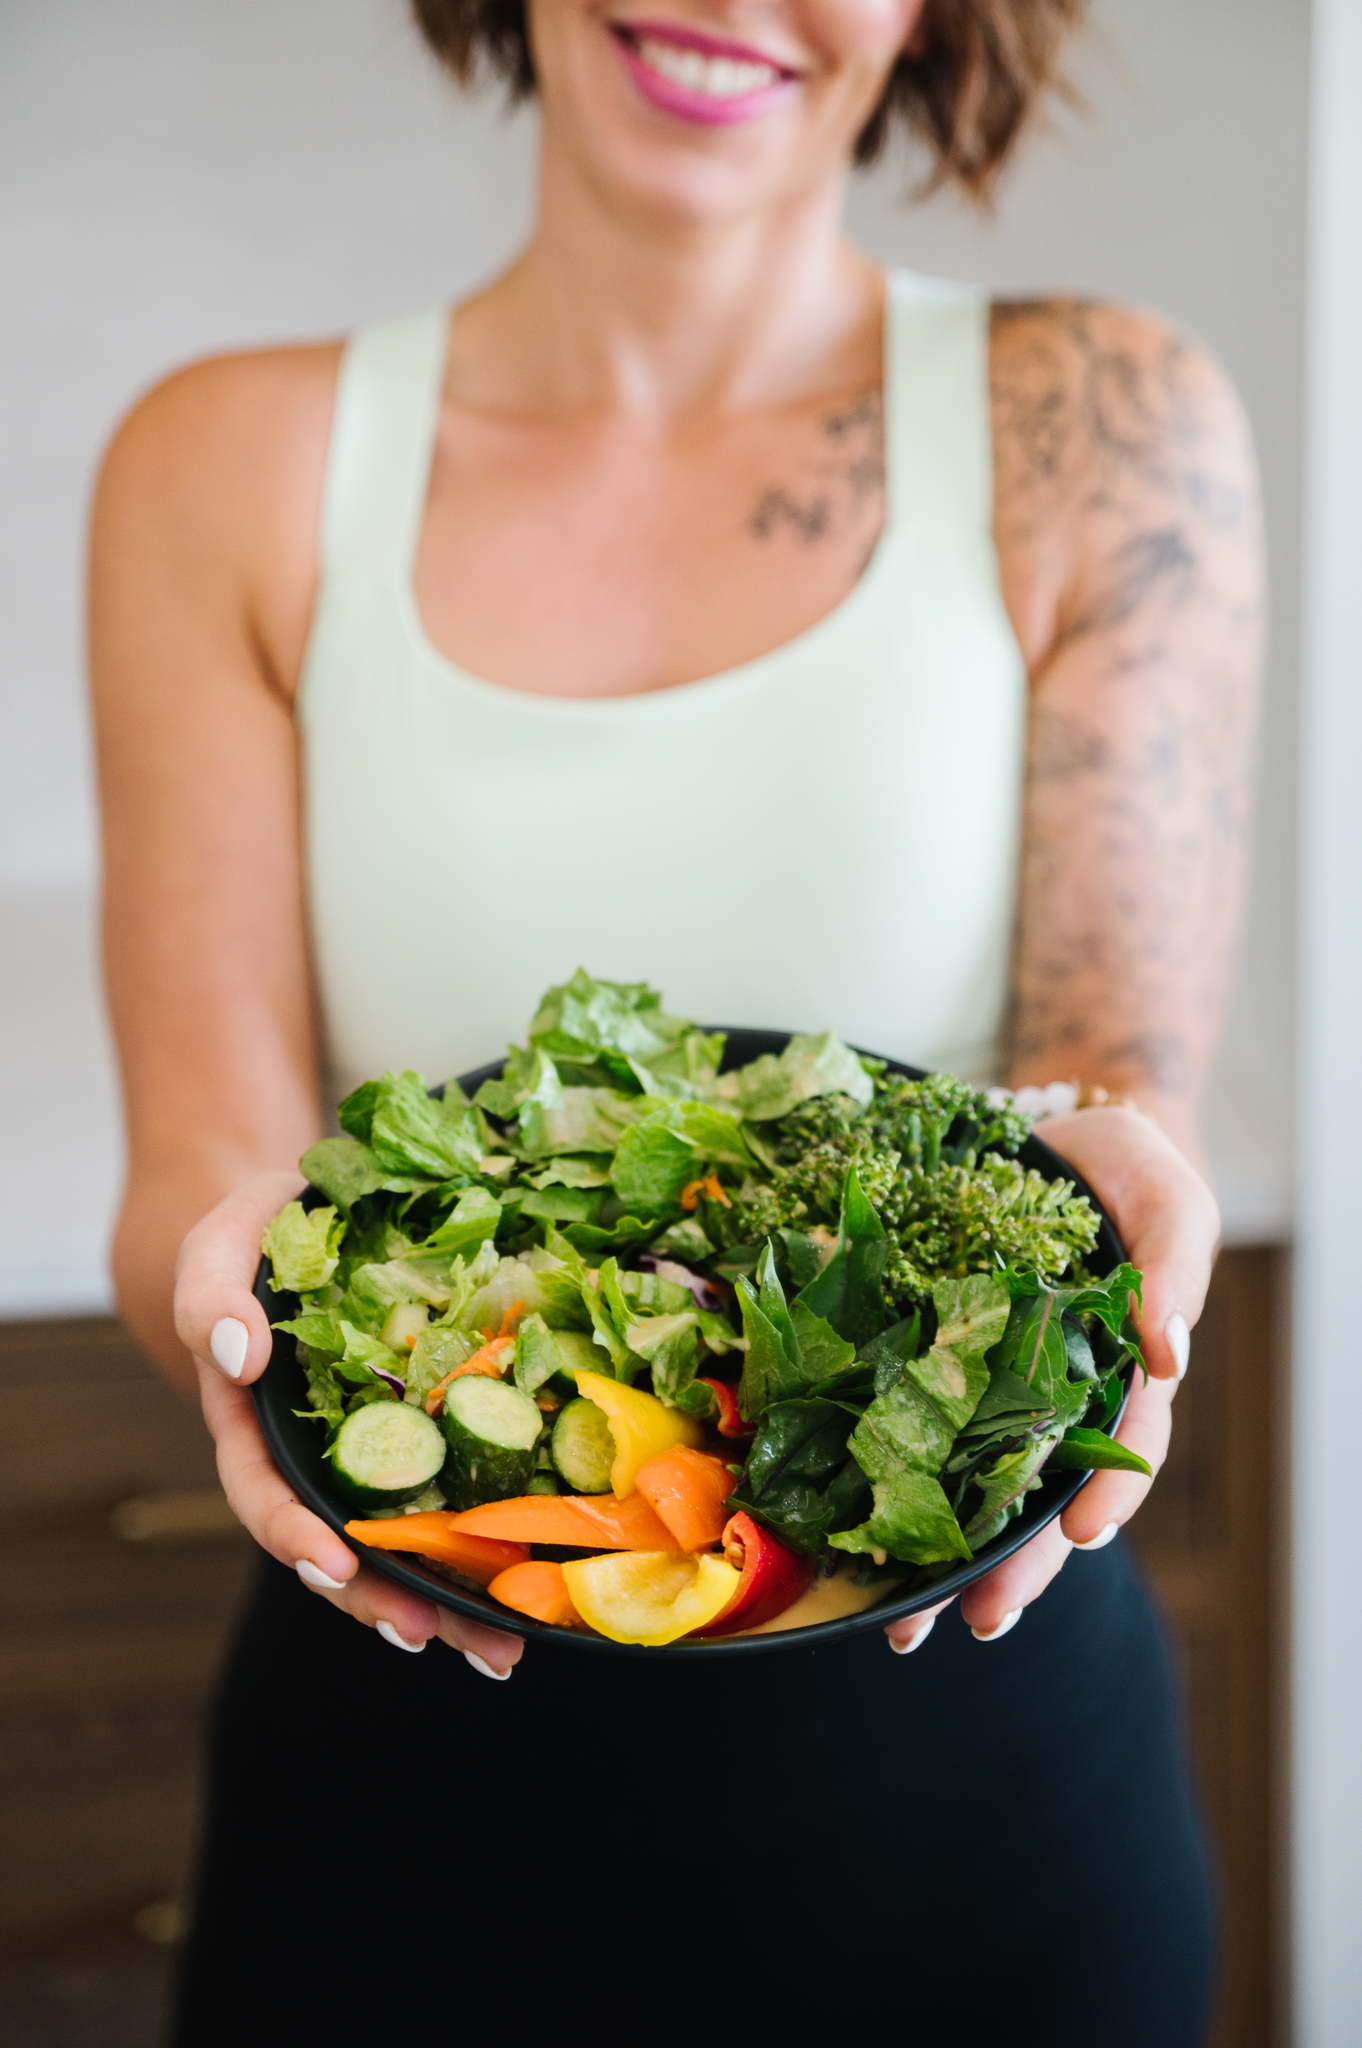 A bowl of nutritious food will help balance hormones.